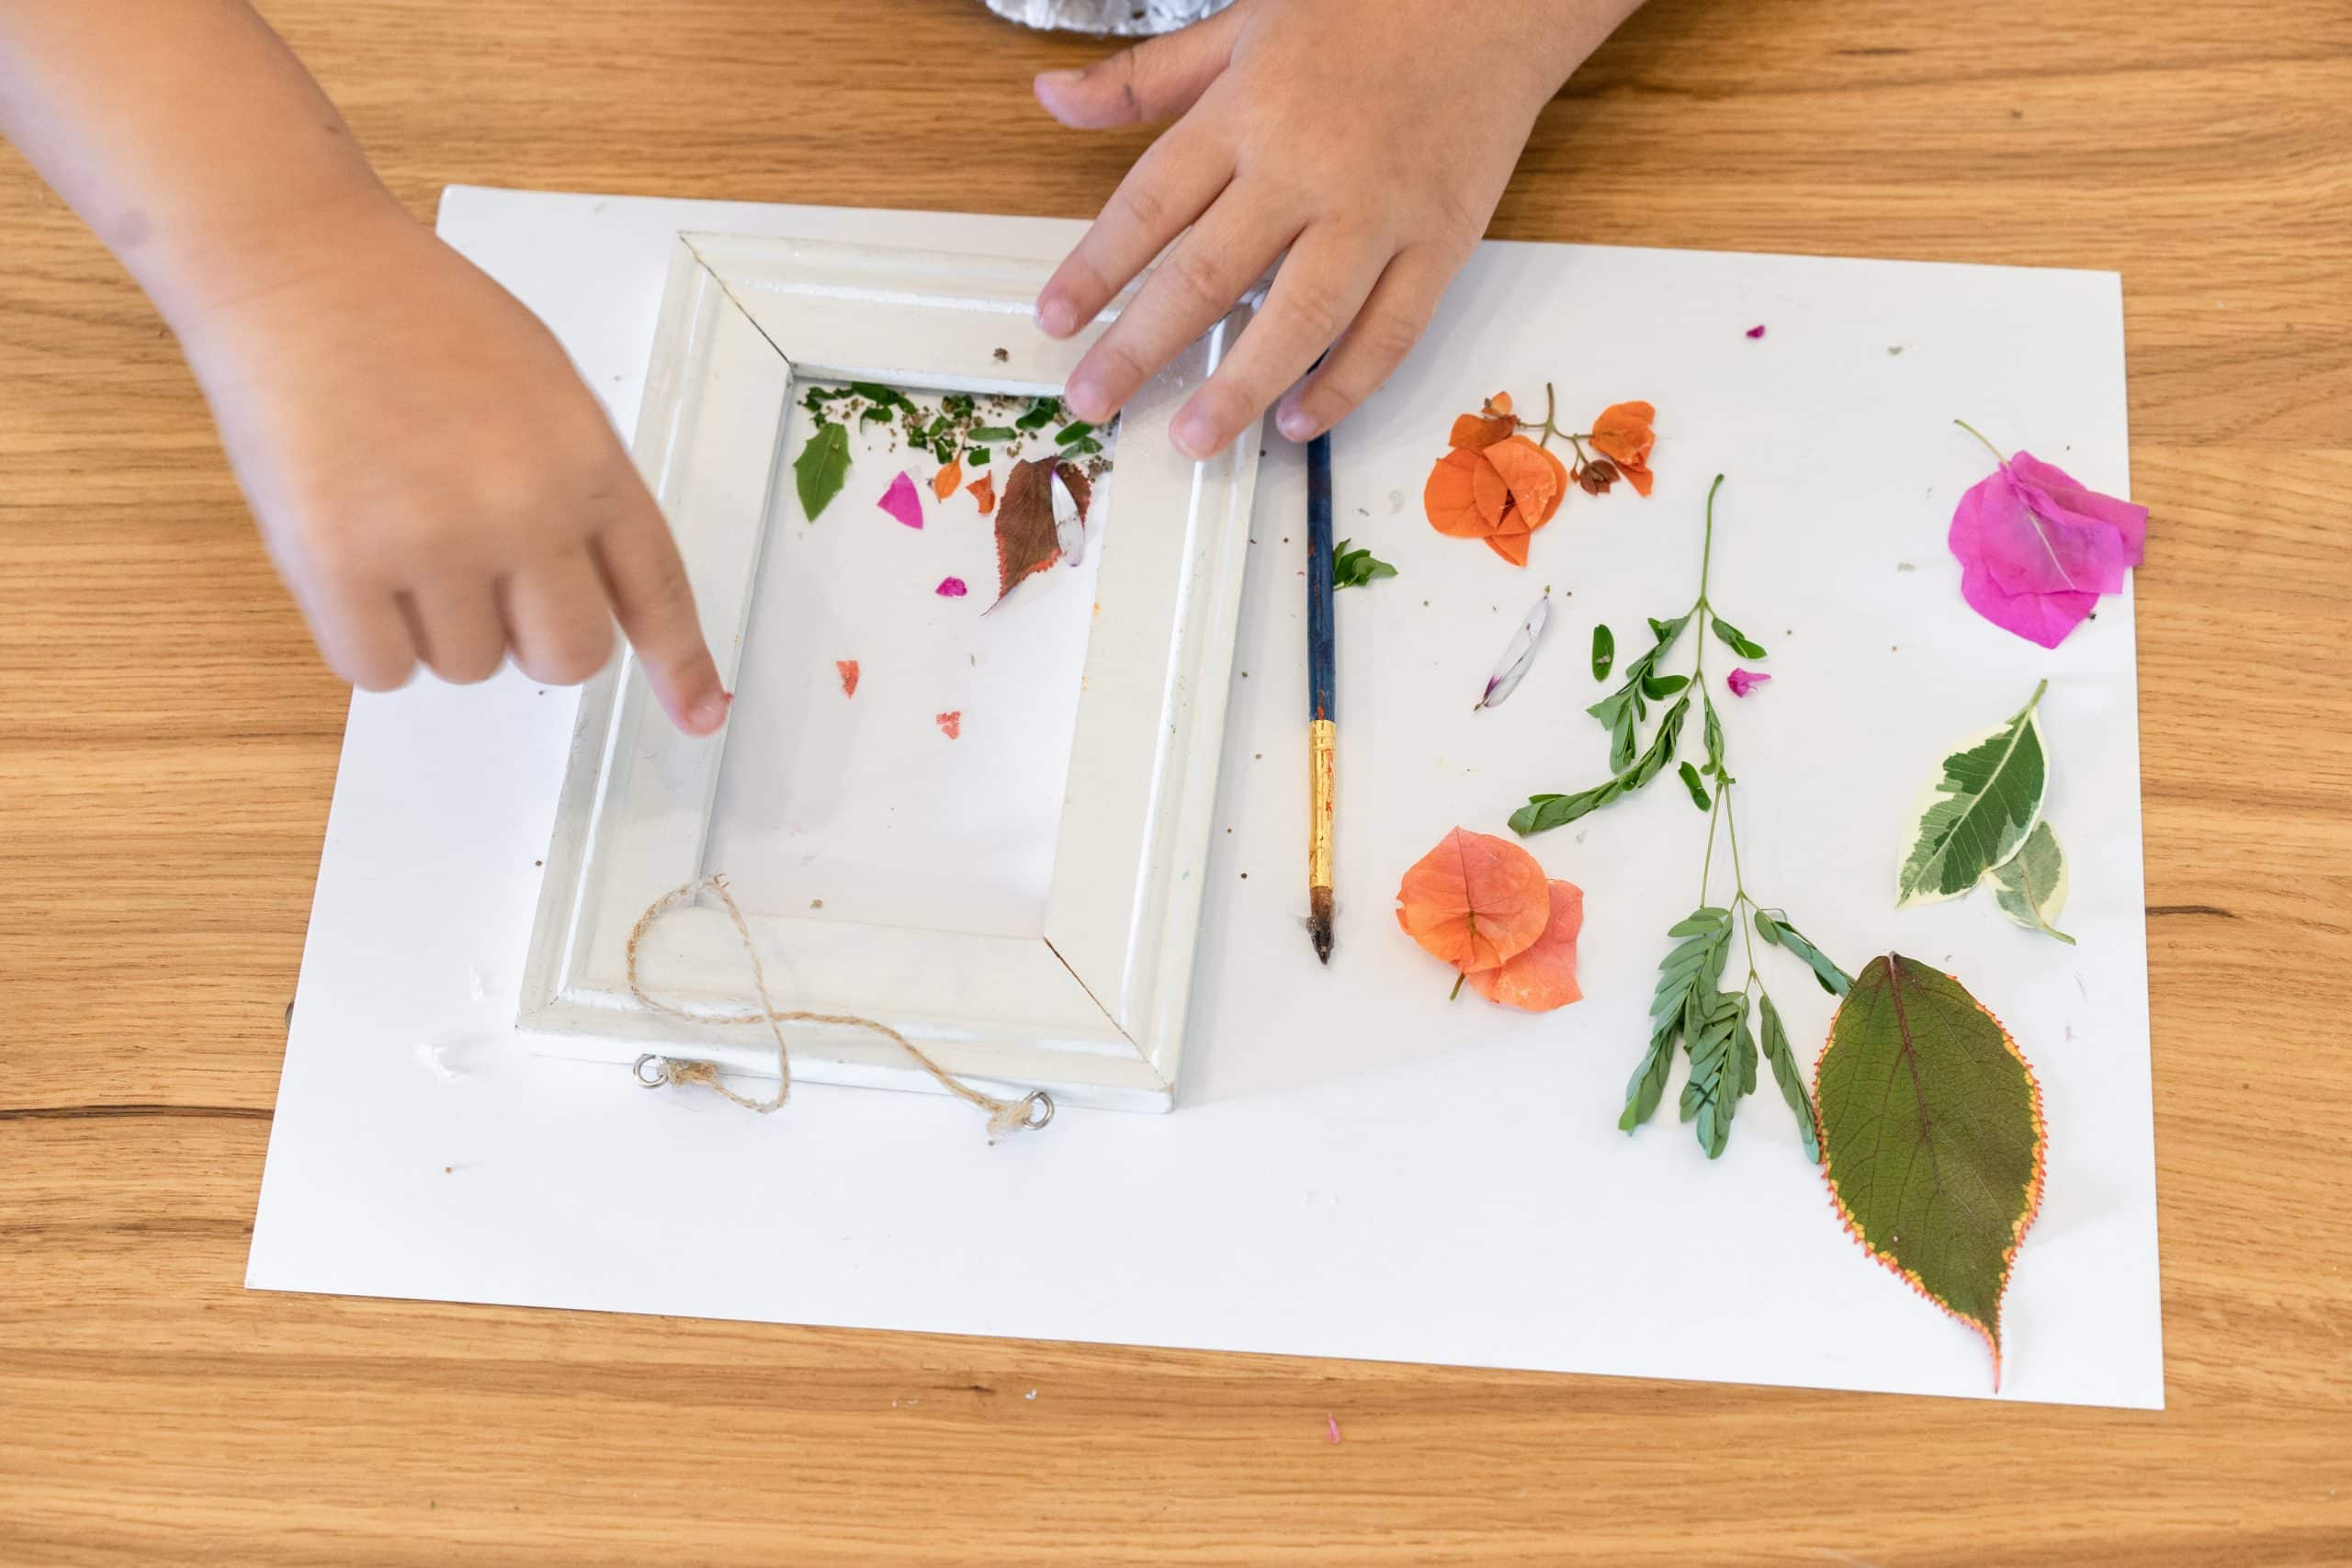 Forget crayons: 11 great art materials for toddlers - The Artful